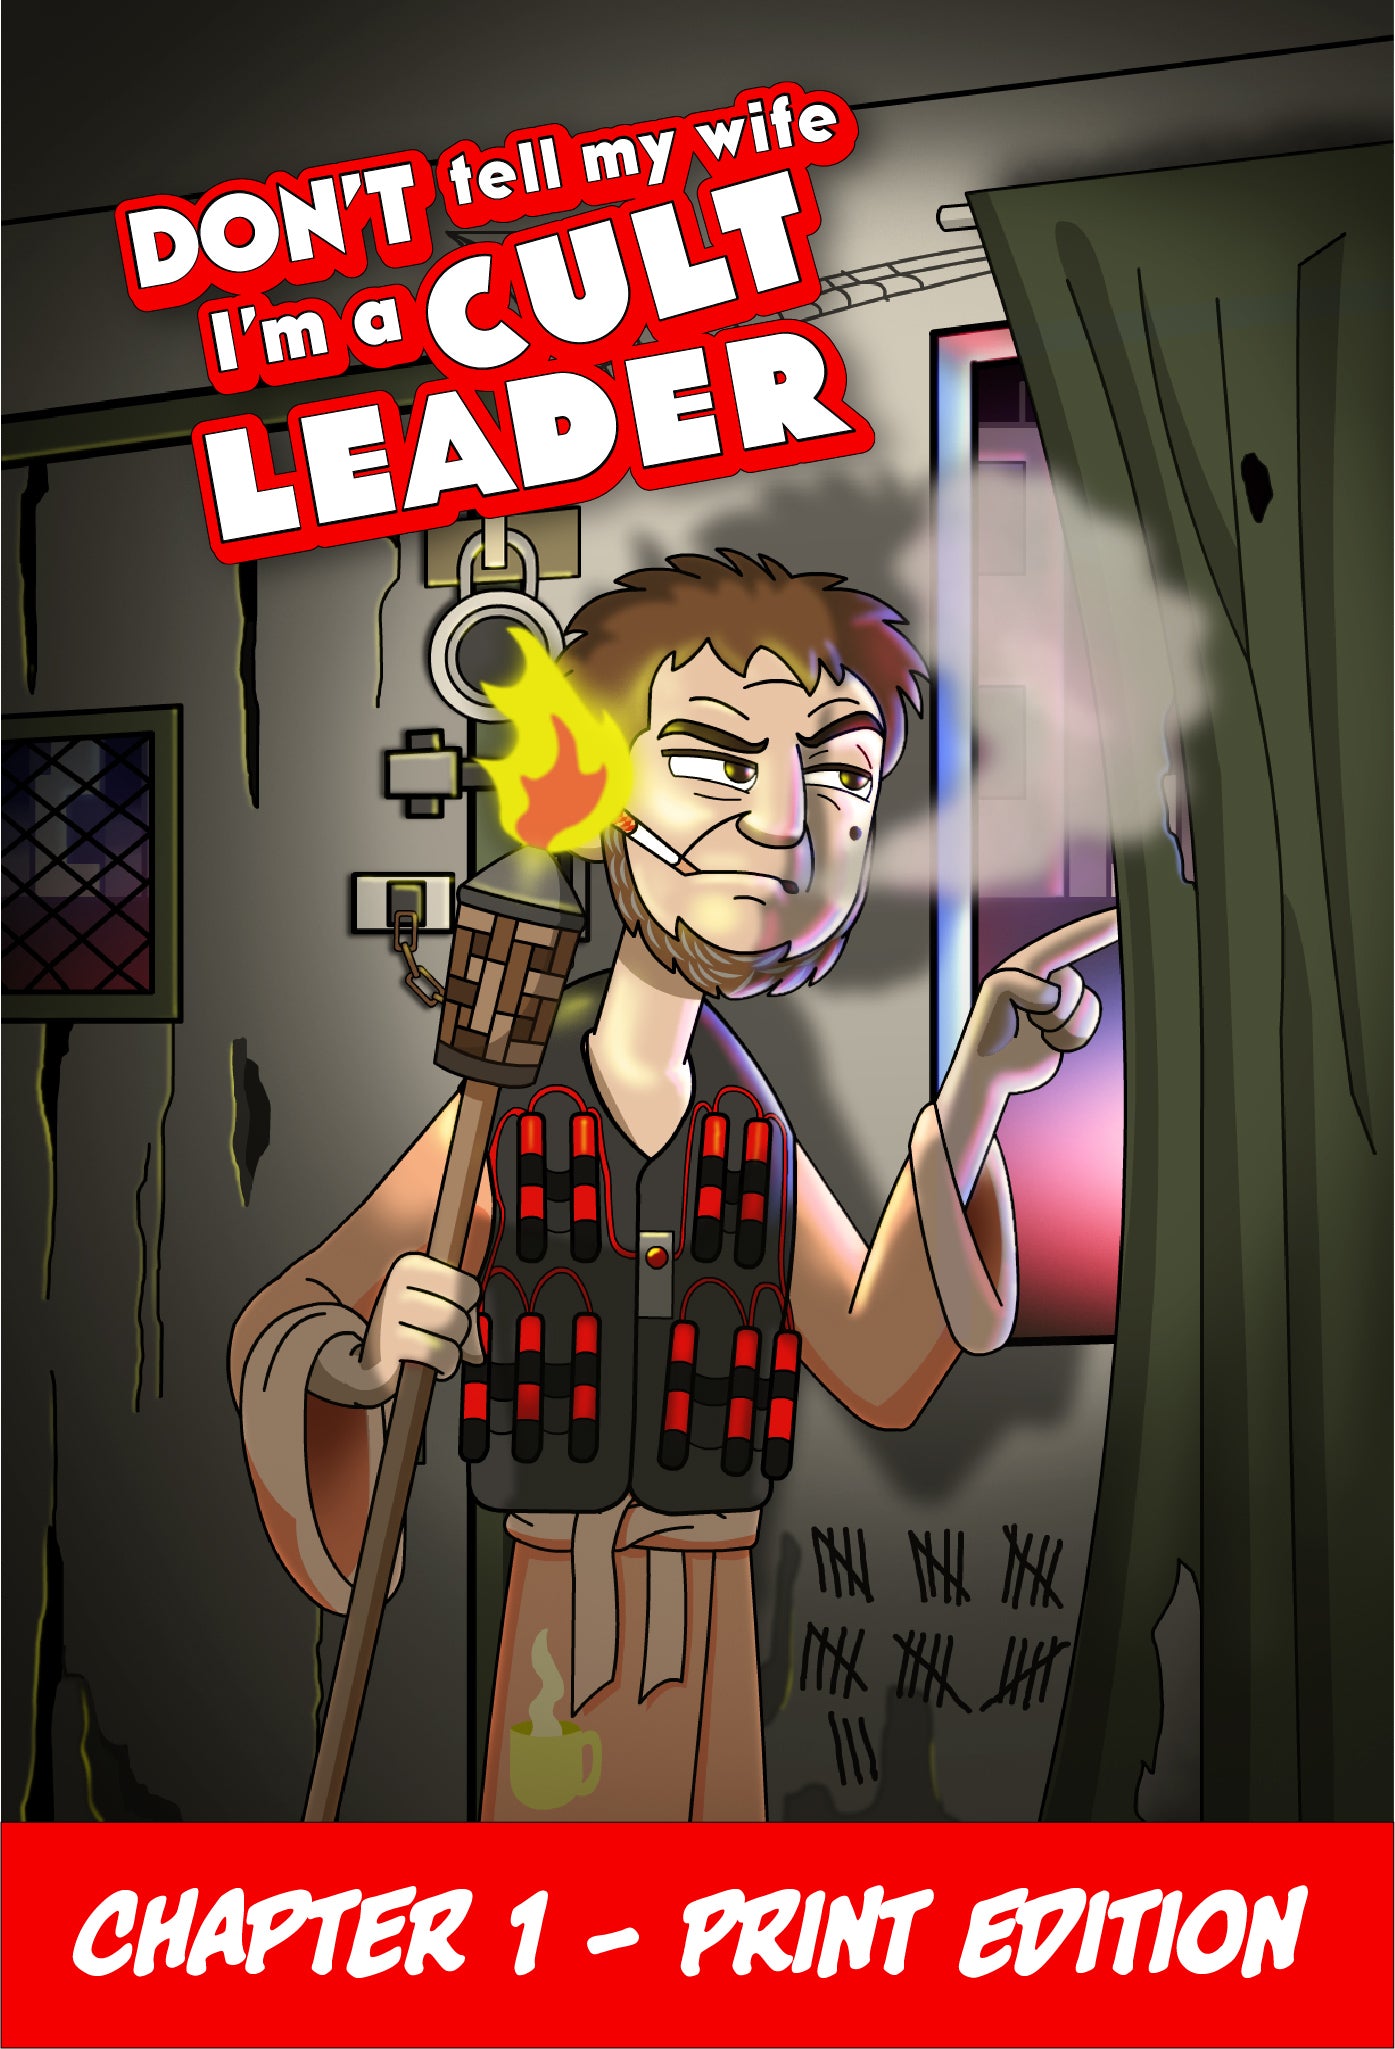 Cover of Chapter 1 of Don't Tell My Wife I'm a Cult Leader. We see Floyd Landers peeking outside a curtain while smoking a cigarette and holding a Tiki torch, print edition cover.